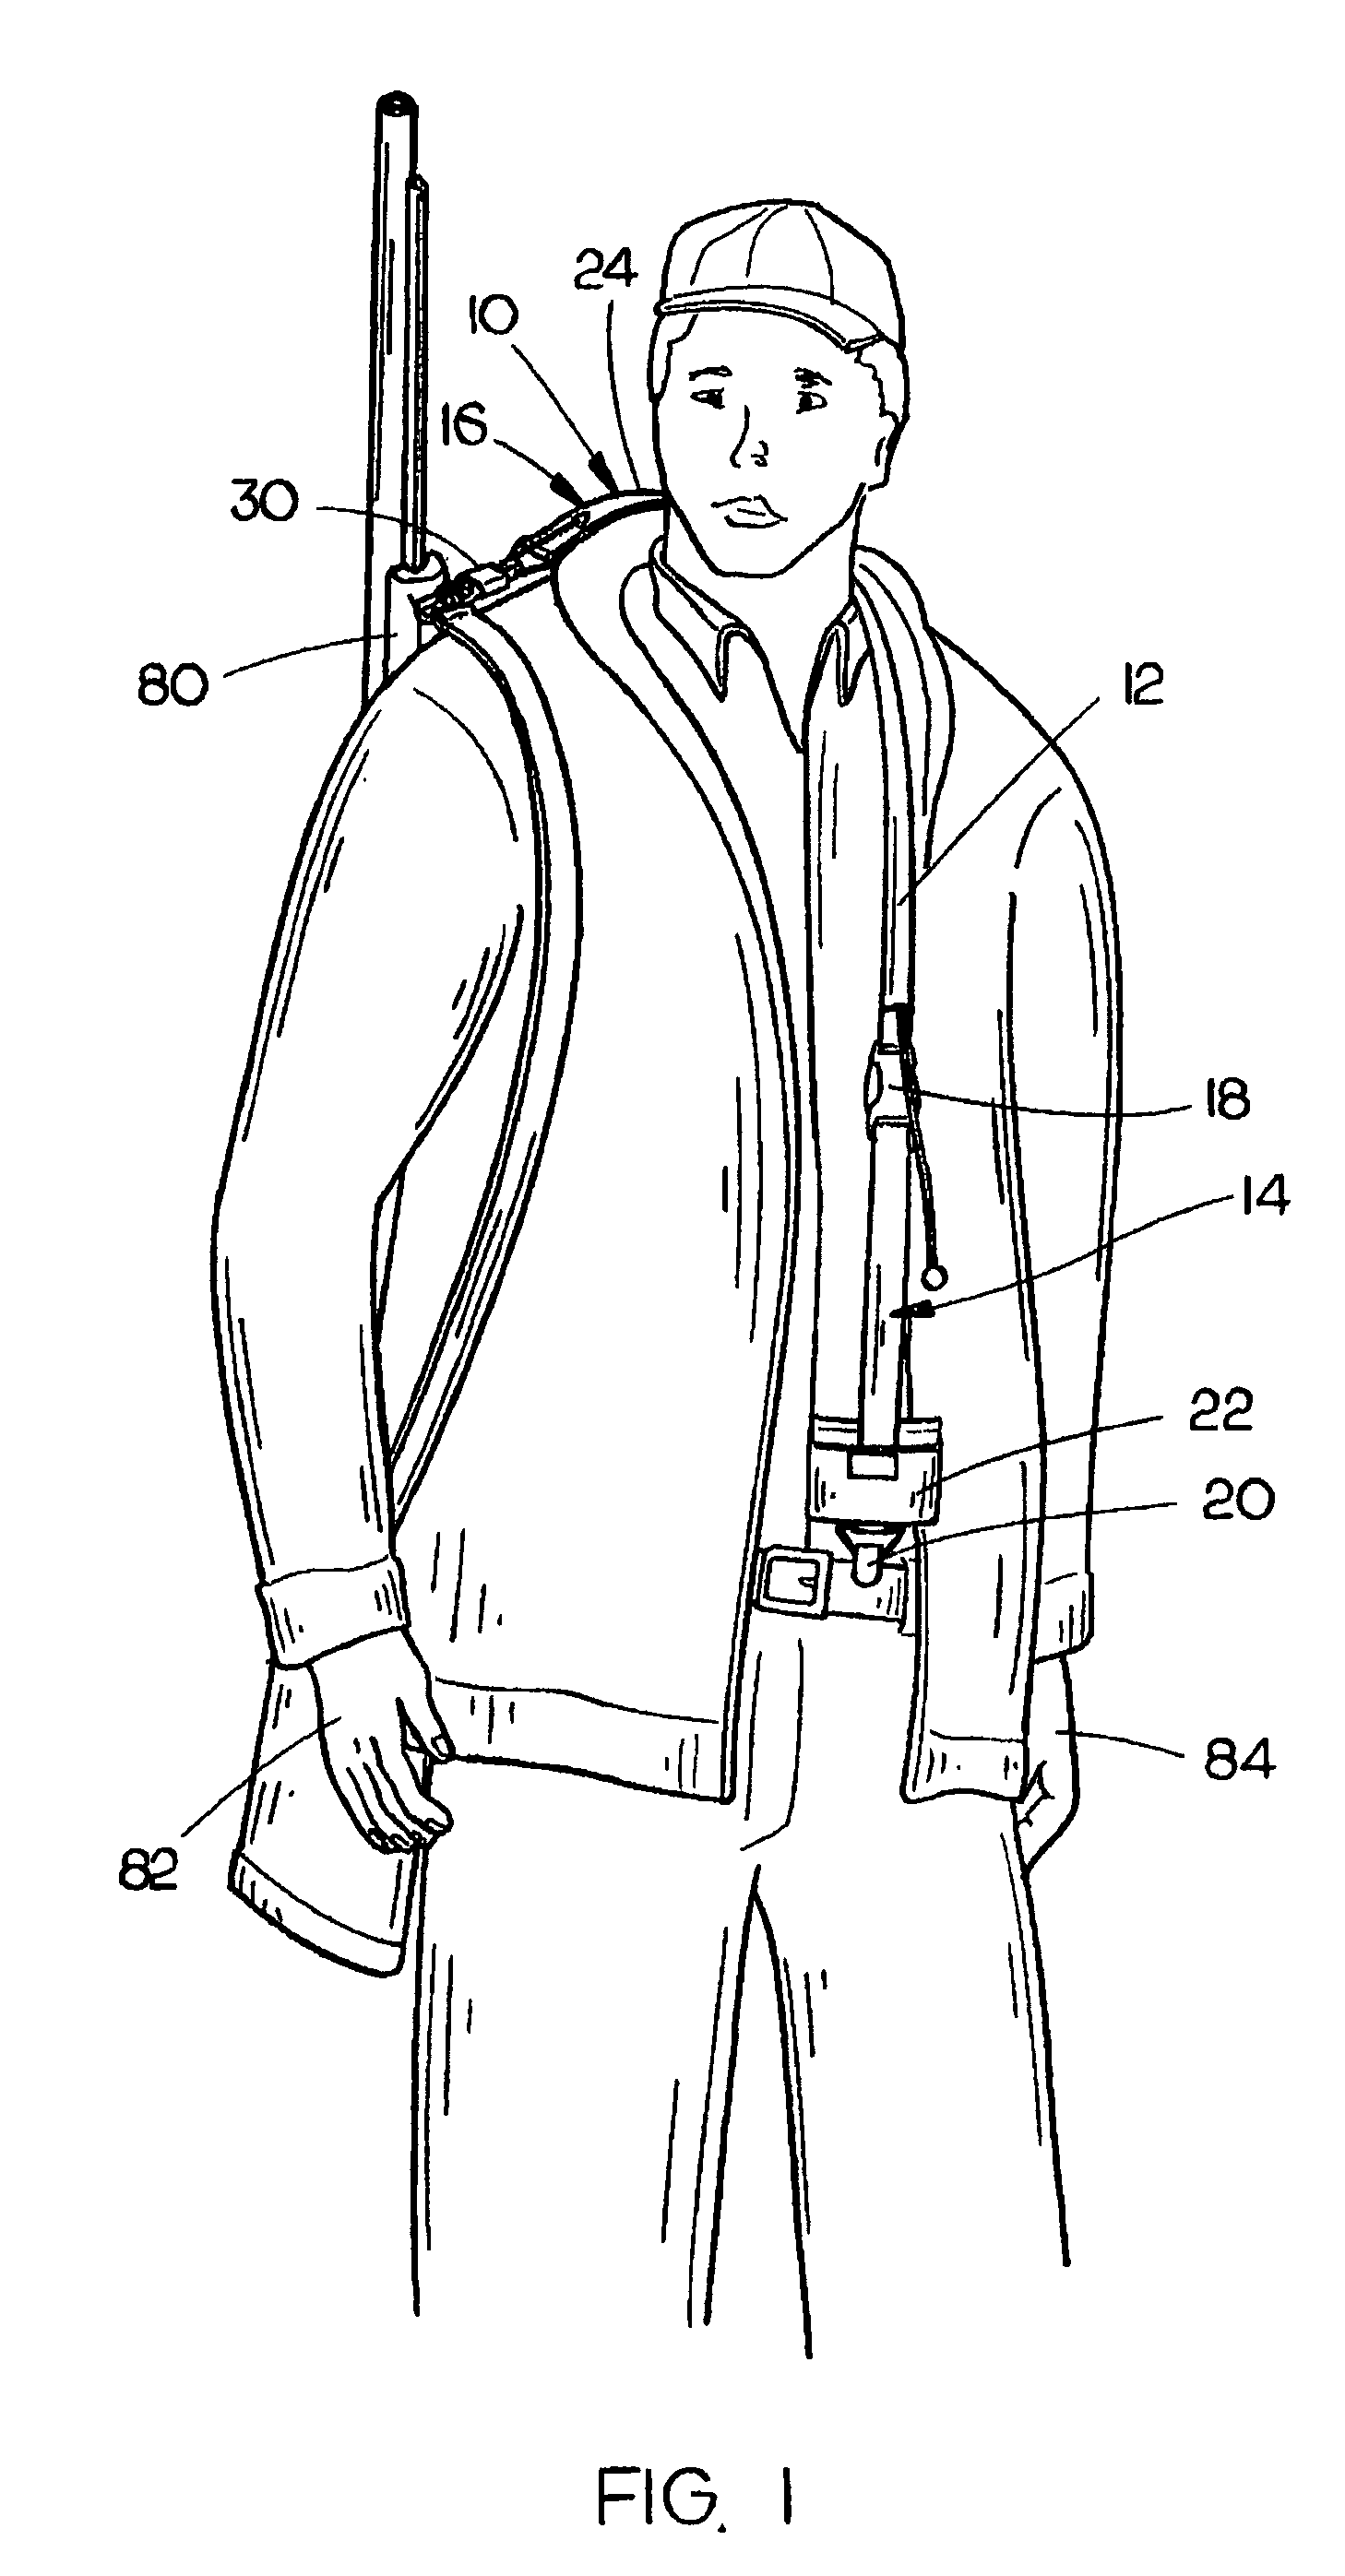 Quick-release support strap device